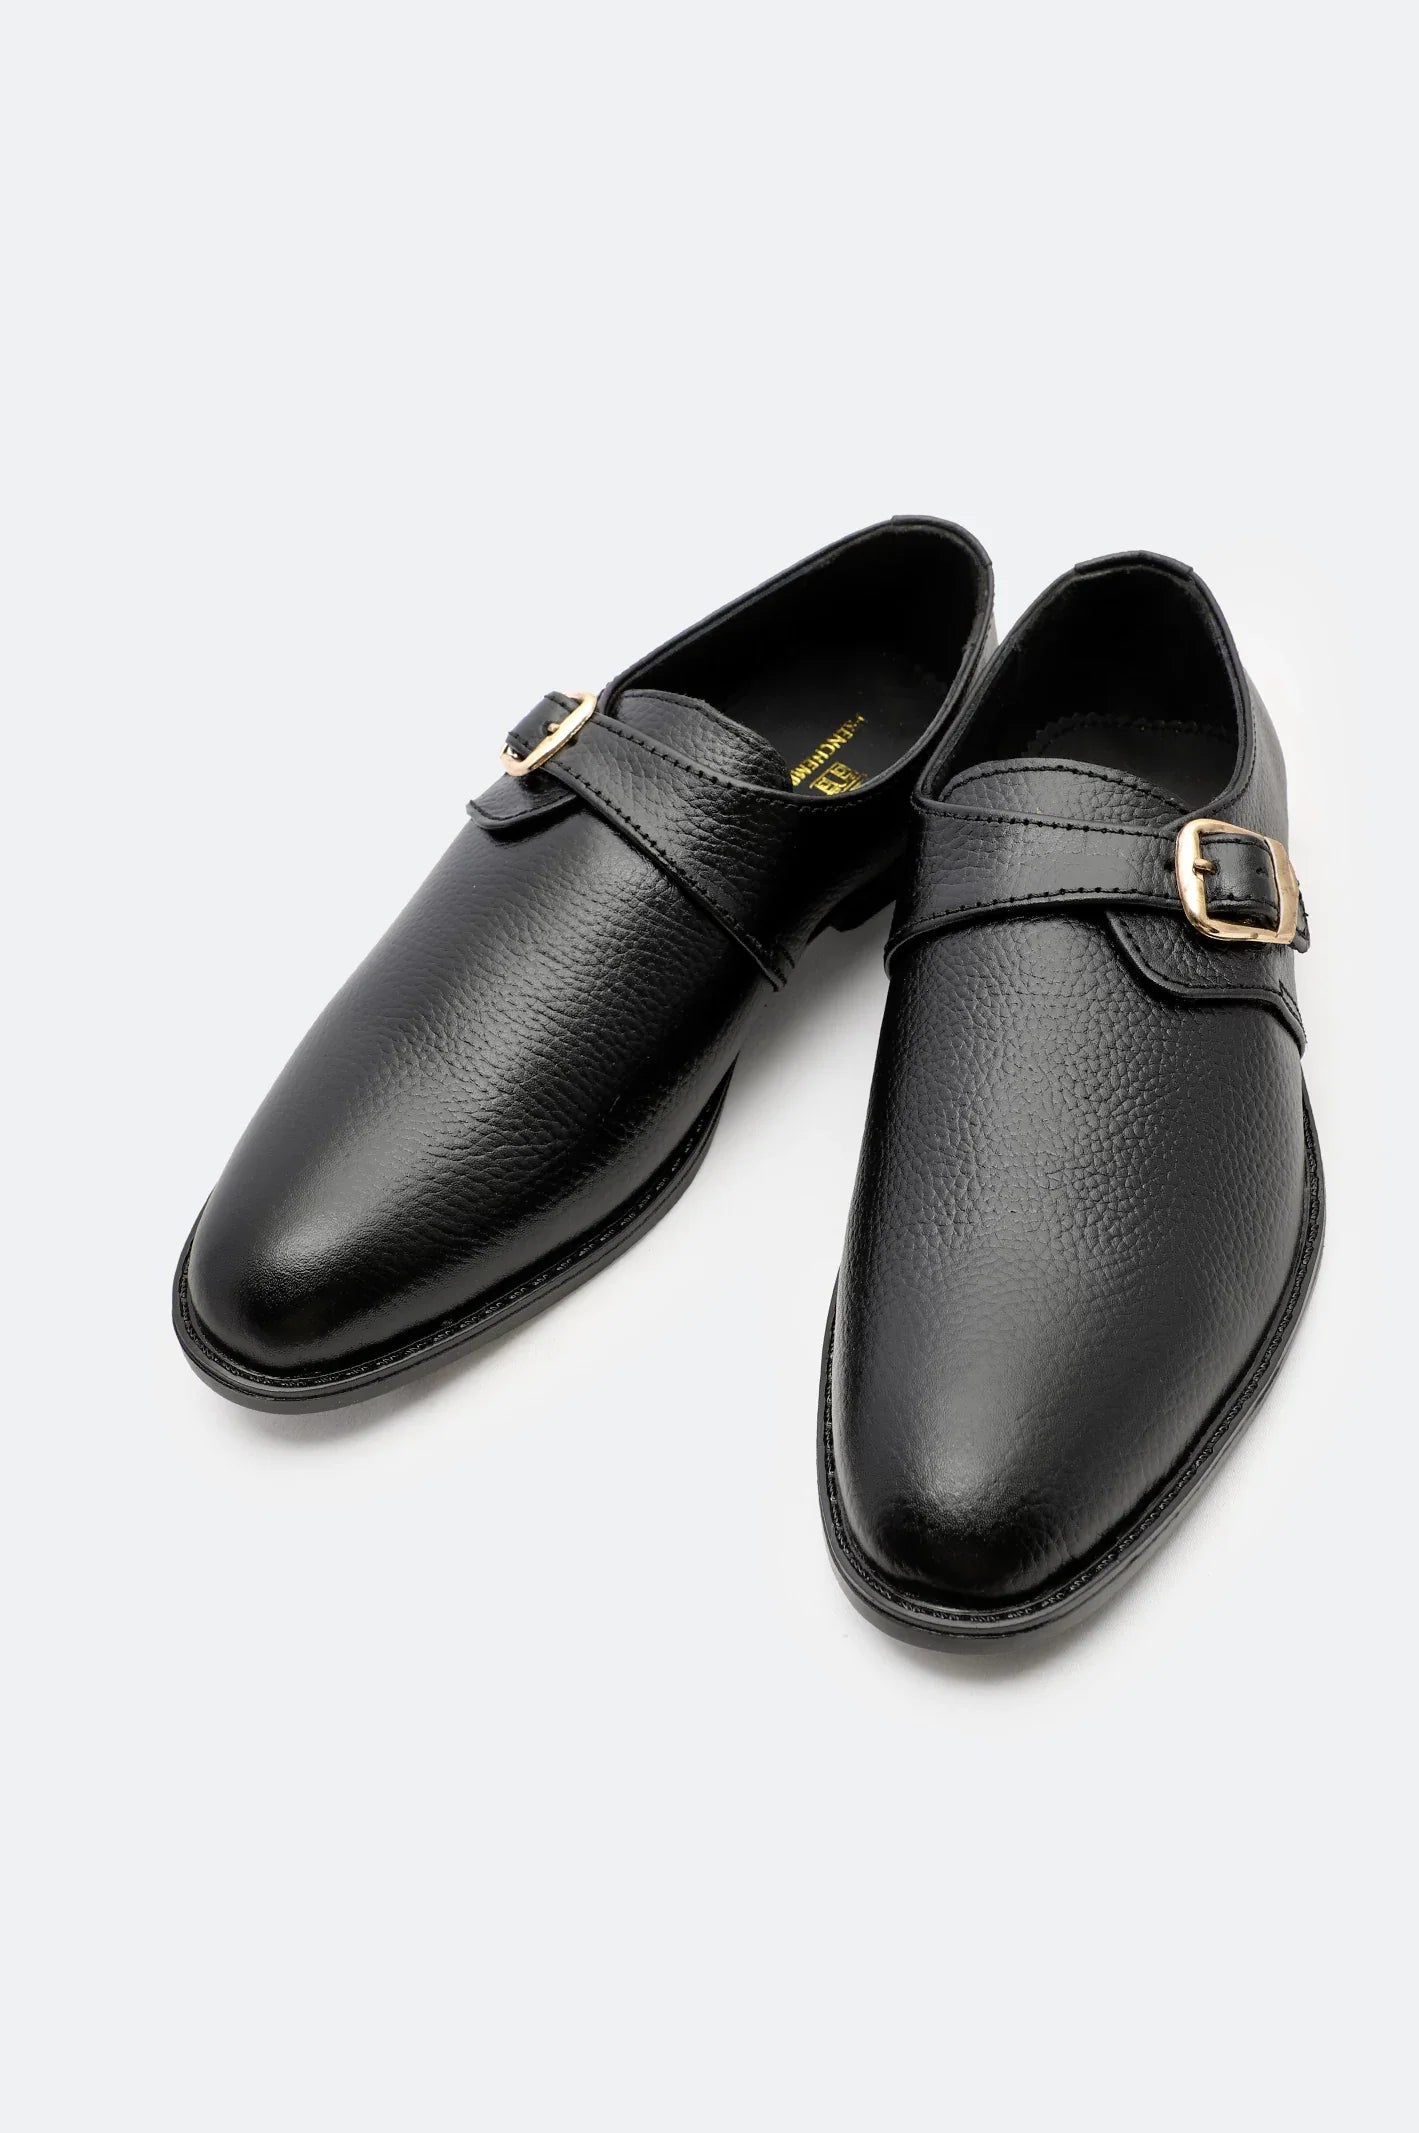 Black Formal Monk Shoes From French Emporio By Diners